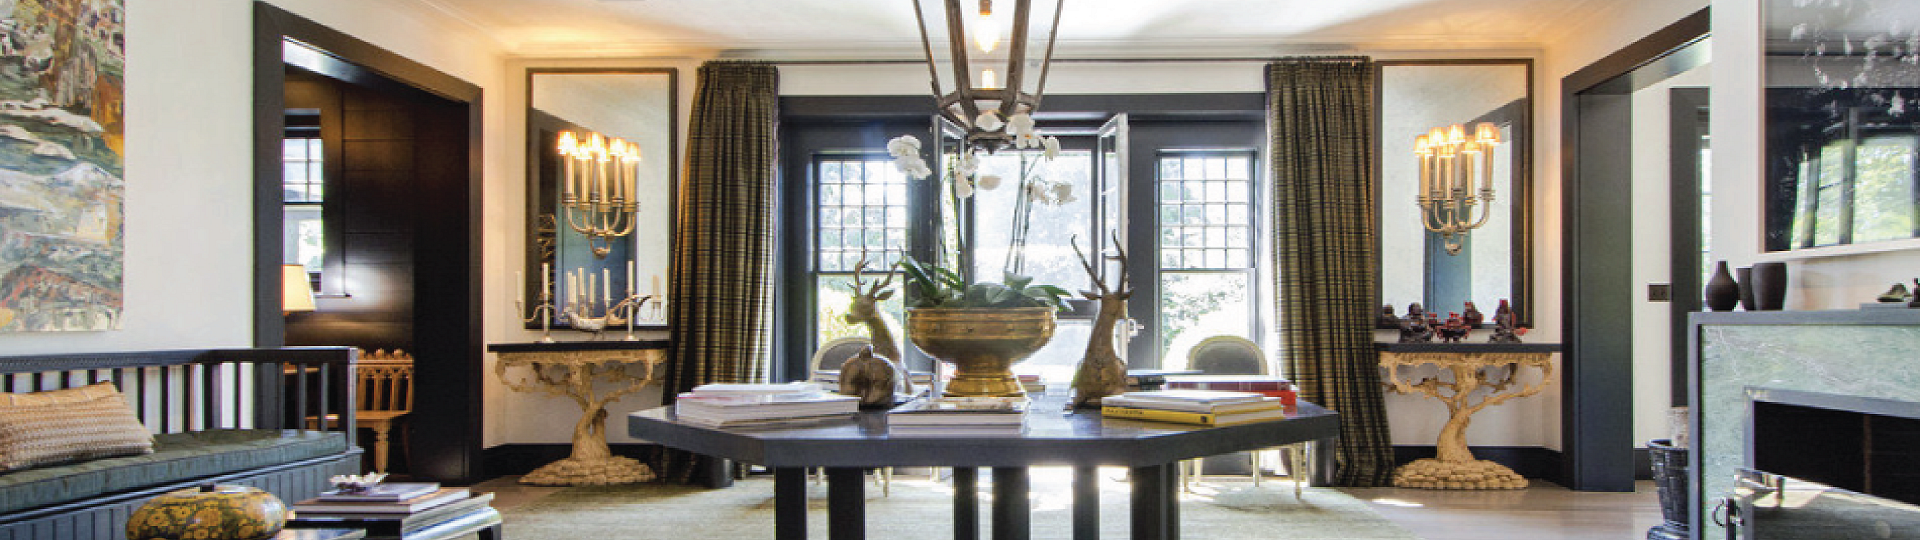 A Hamptons Interior Designed by Steven Gambrel by STAIR